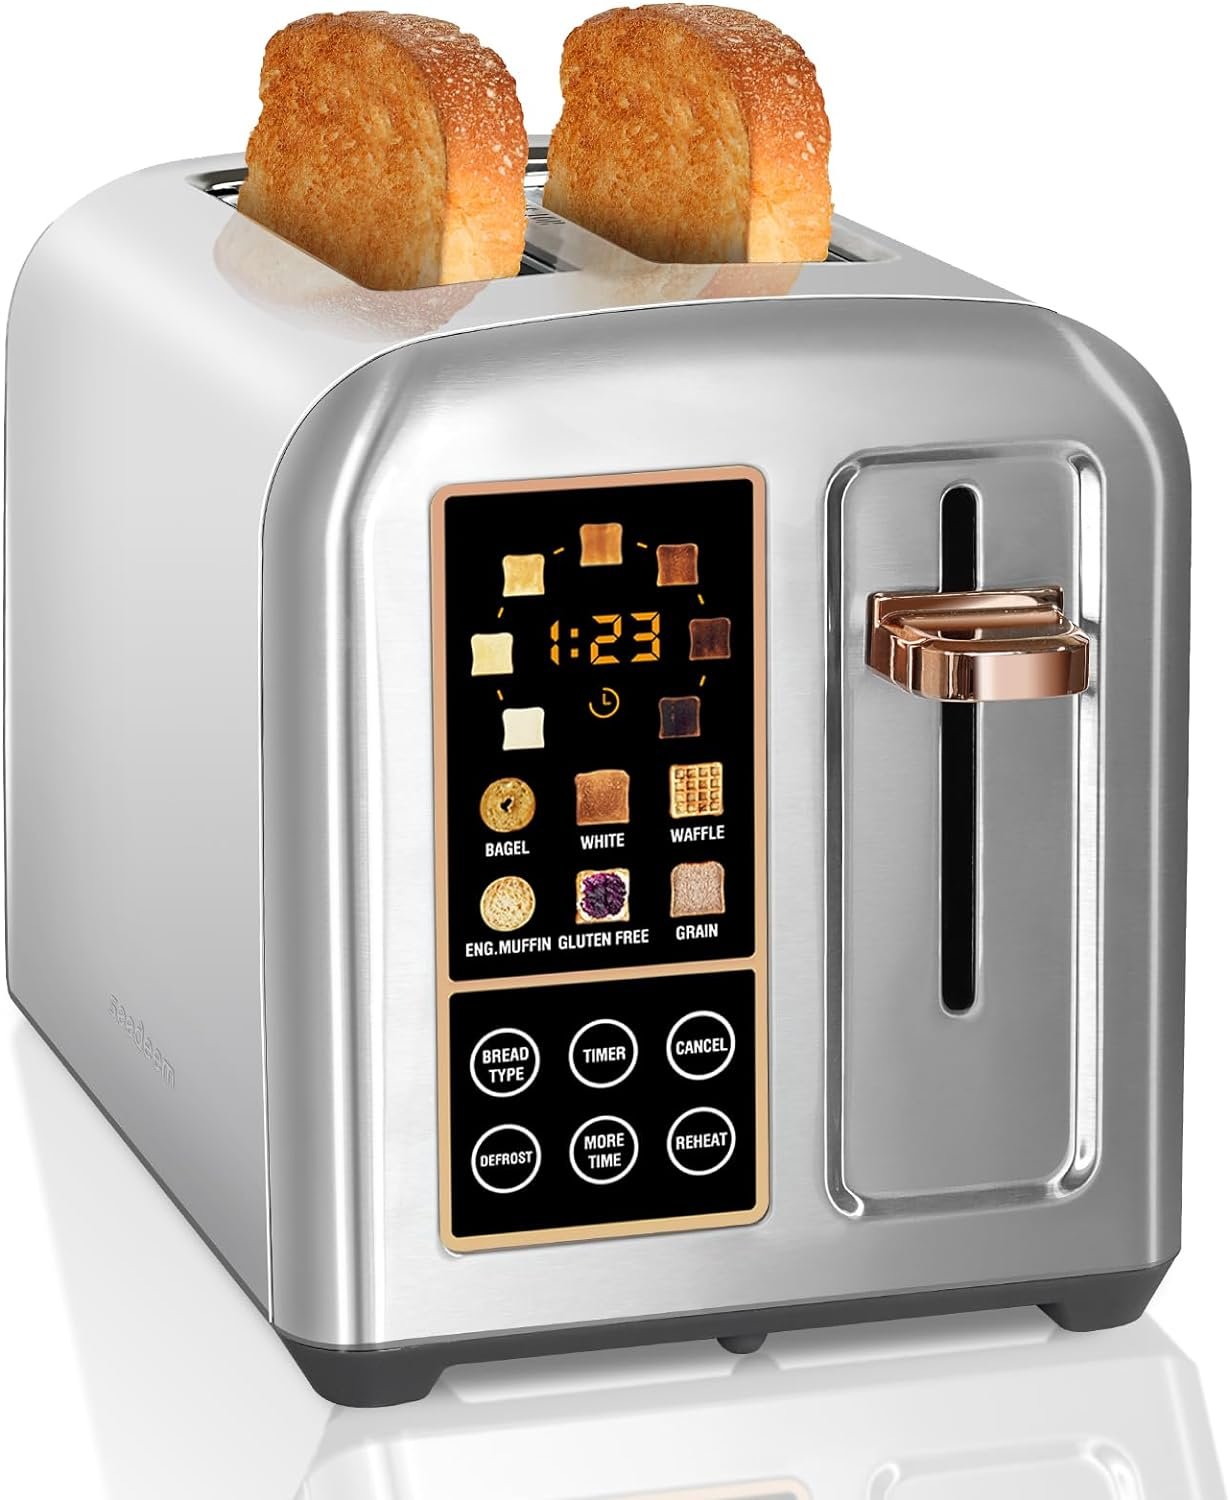 SEEDEEM Toaster 2 Slice, Stainless Toaster LCD DisplayTouch Buttons, 50% Faster Heating Speed, 6 Bread Selection, 7 Shade Setting, 1.5Wide Slot, Removable Crumb Tray, 1350W, Silver Metallic